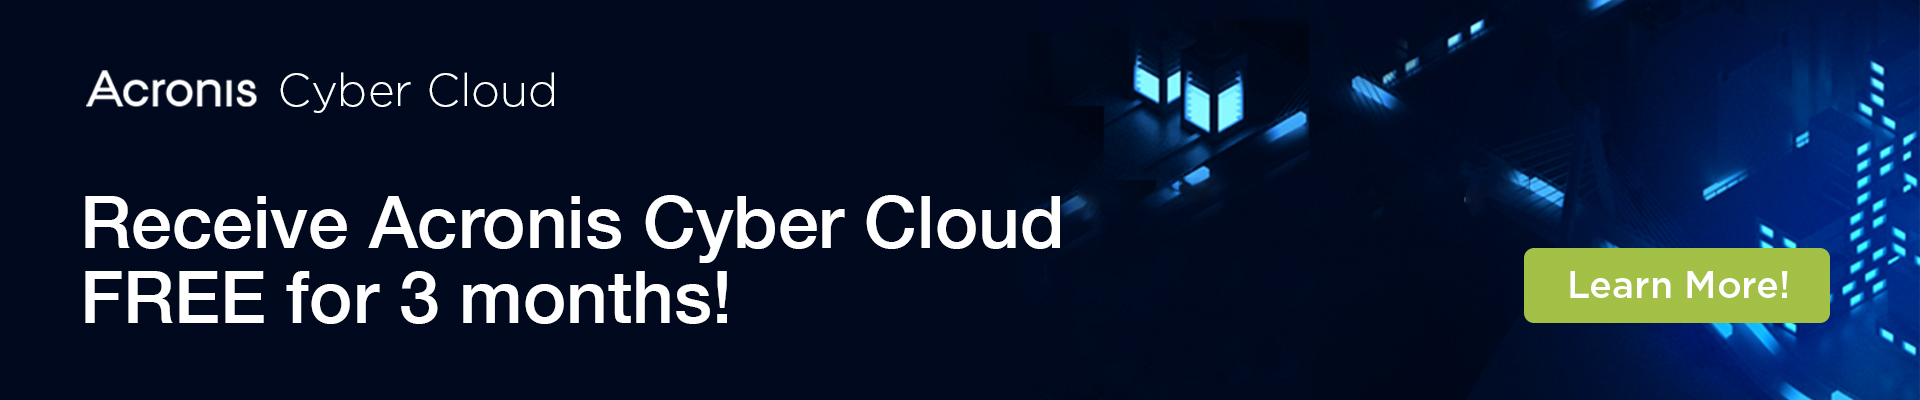 Receive Acronis Cyber Cloud free for 3 months!